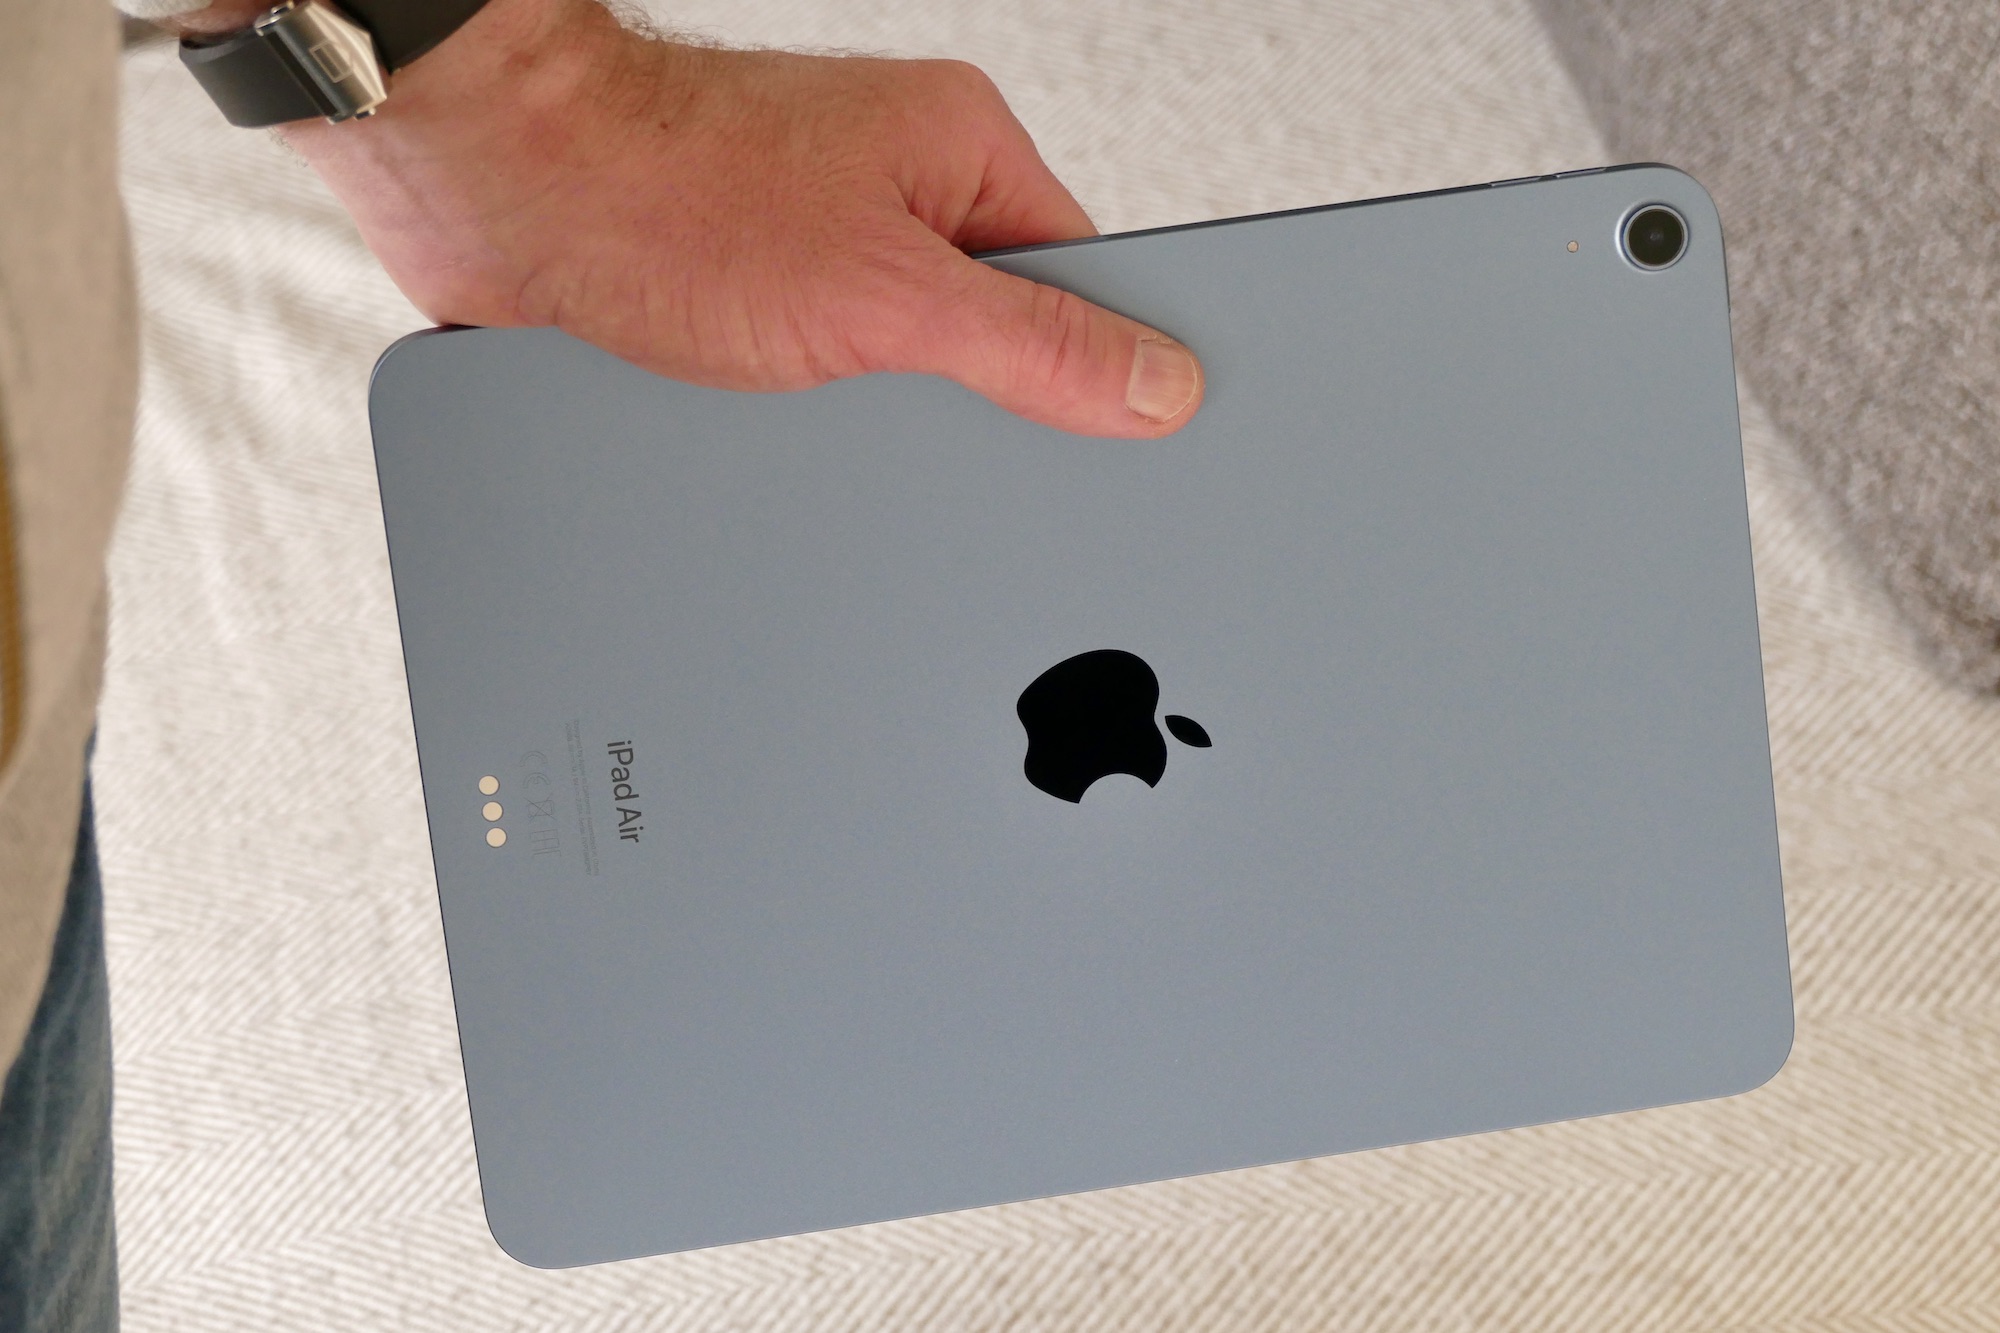 Hands On: iPad Air 4's display, Touch ID change pushes the line forward